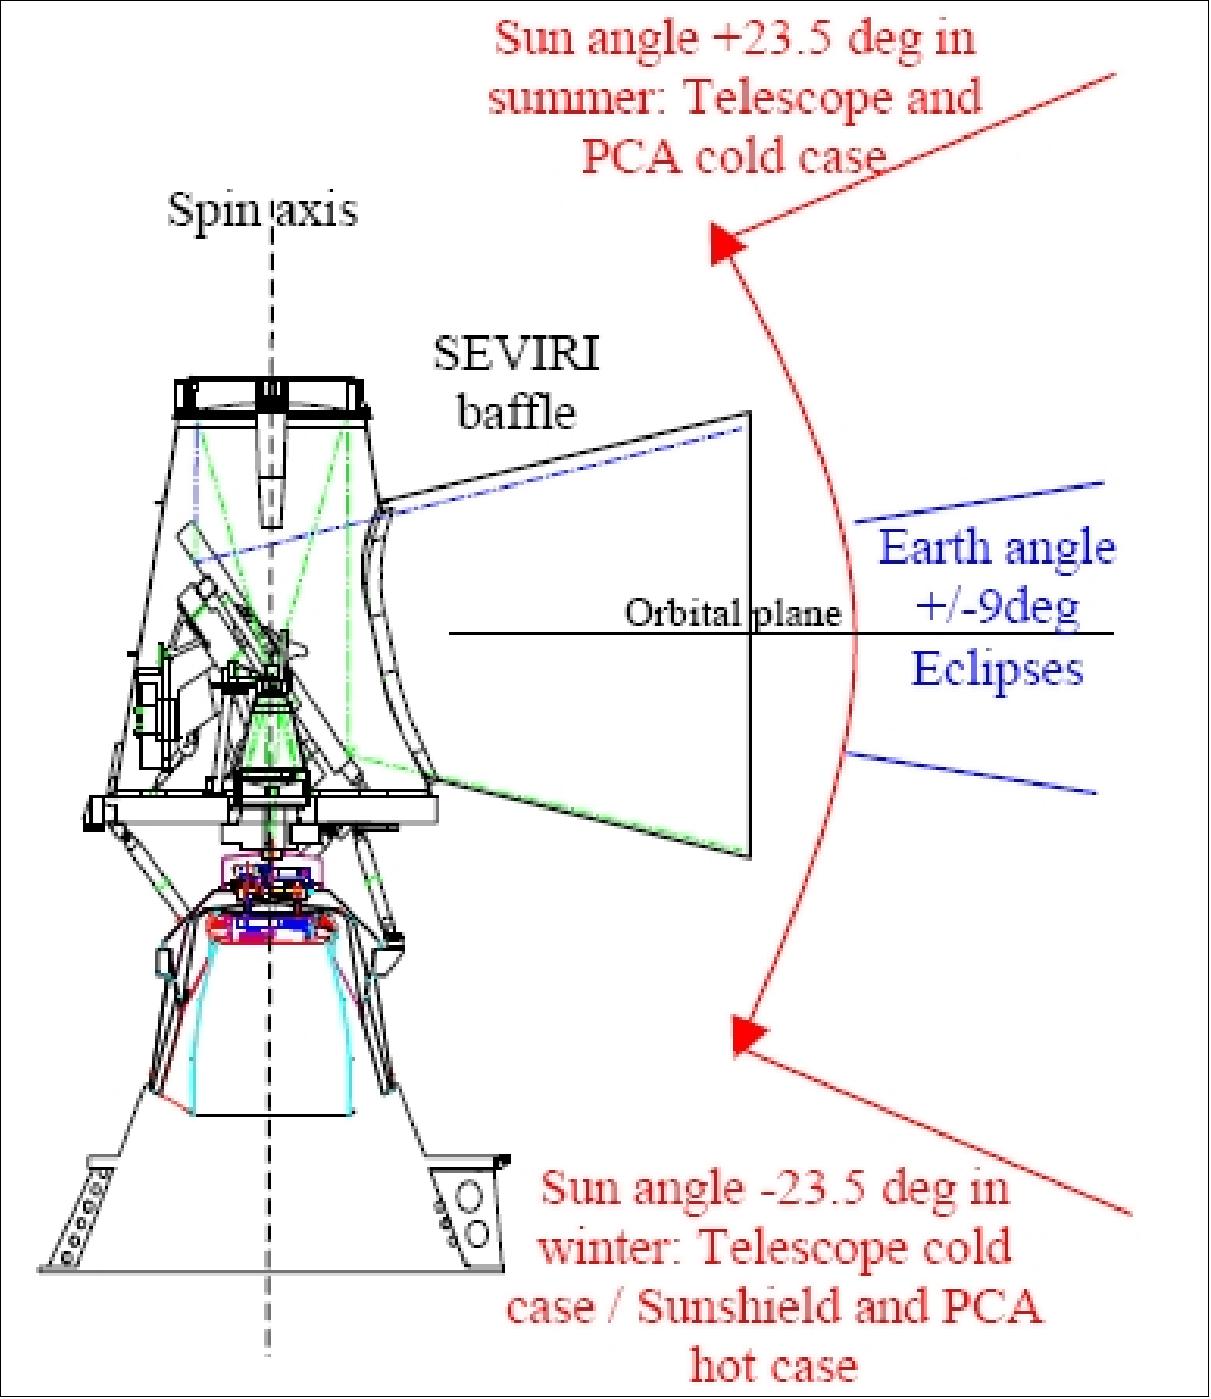 Figure 23: Sun angle evolution with respect to SEVIRI (image credit: EADS Astrium)